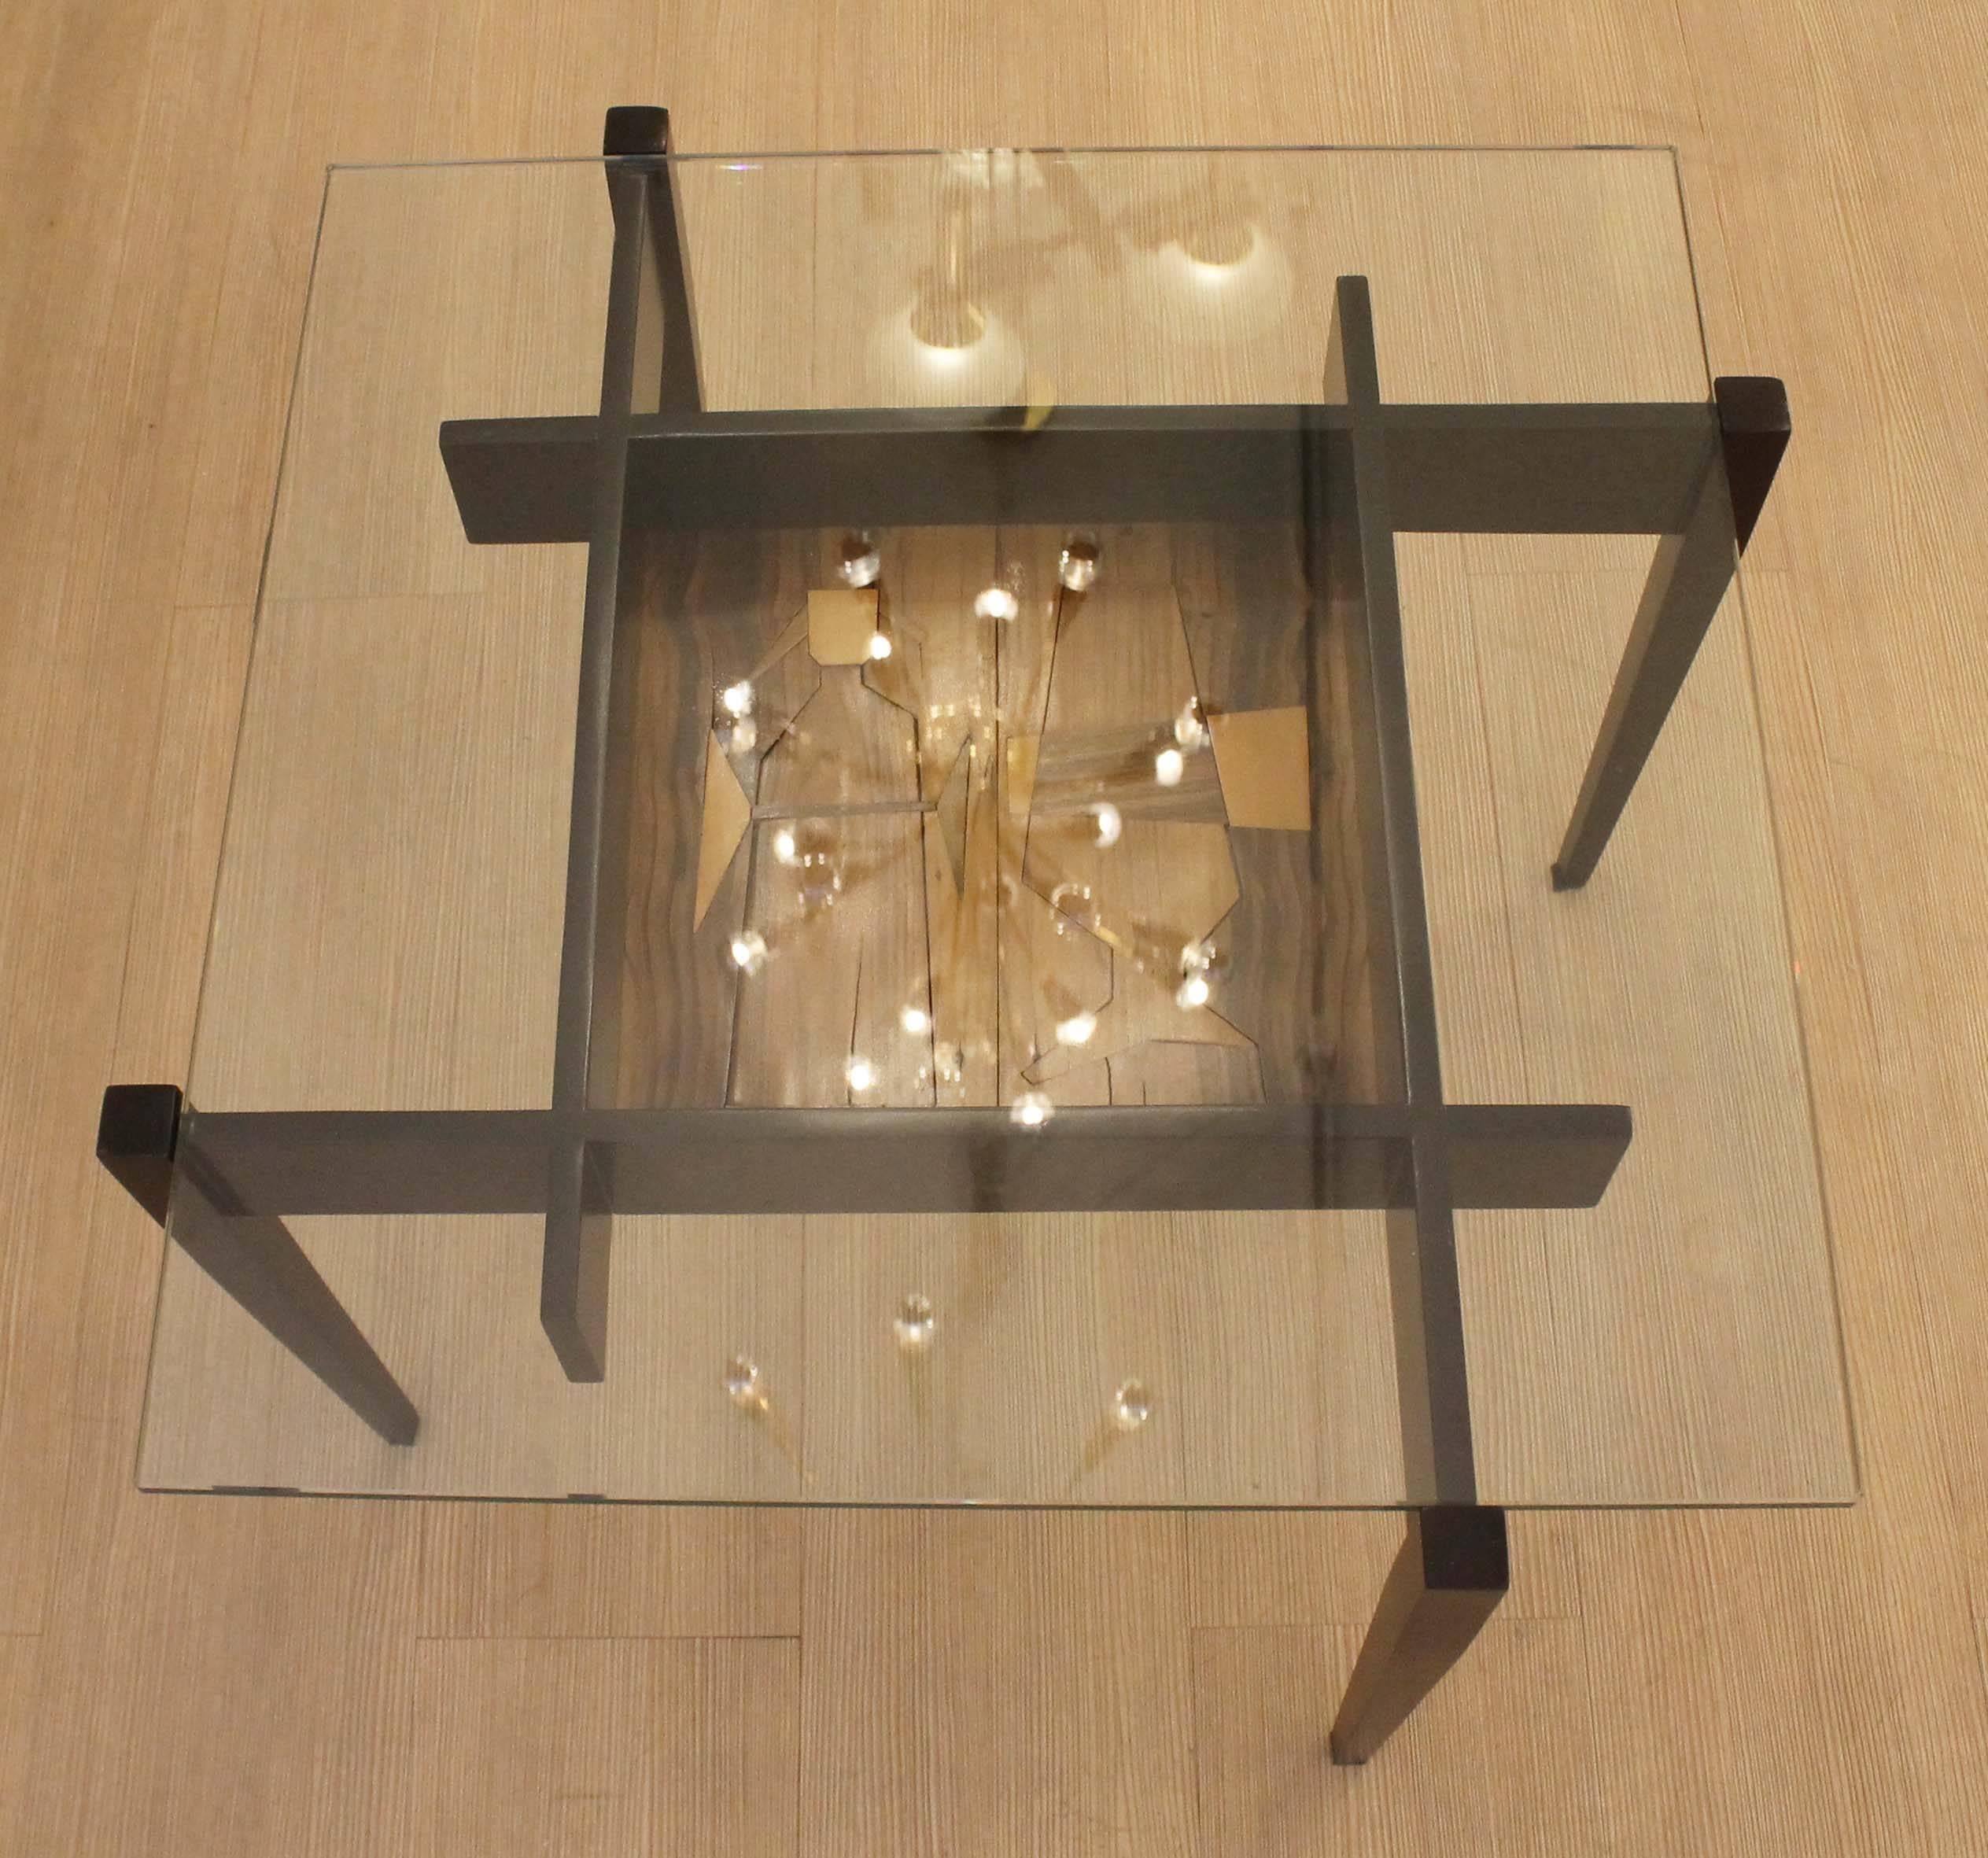 Playful wood table with glass top. At the center there is a decorative cocktail themed etching.
